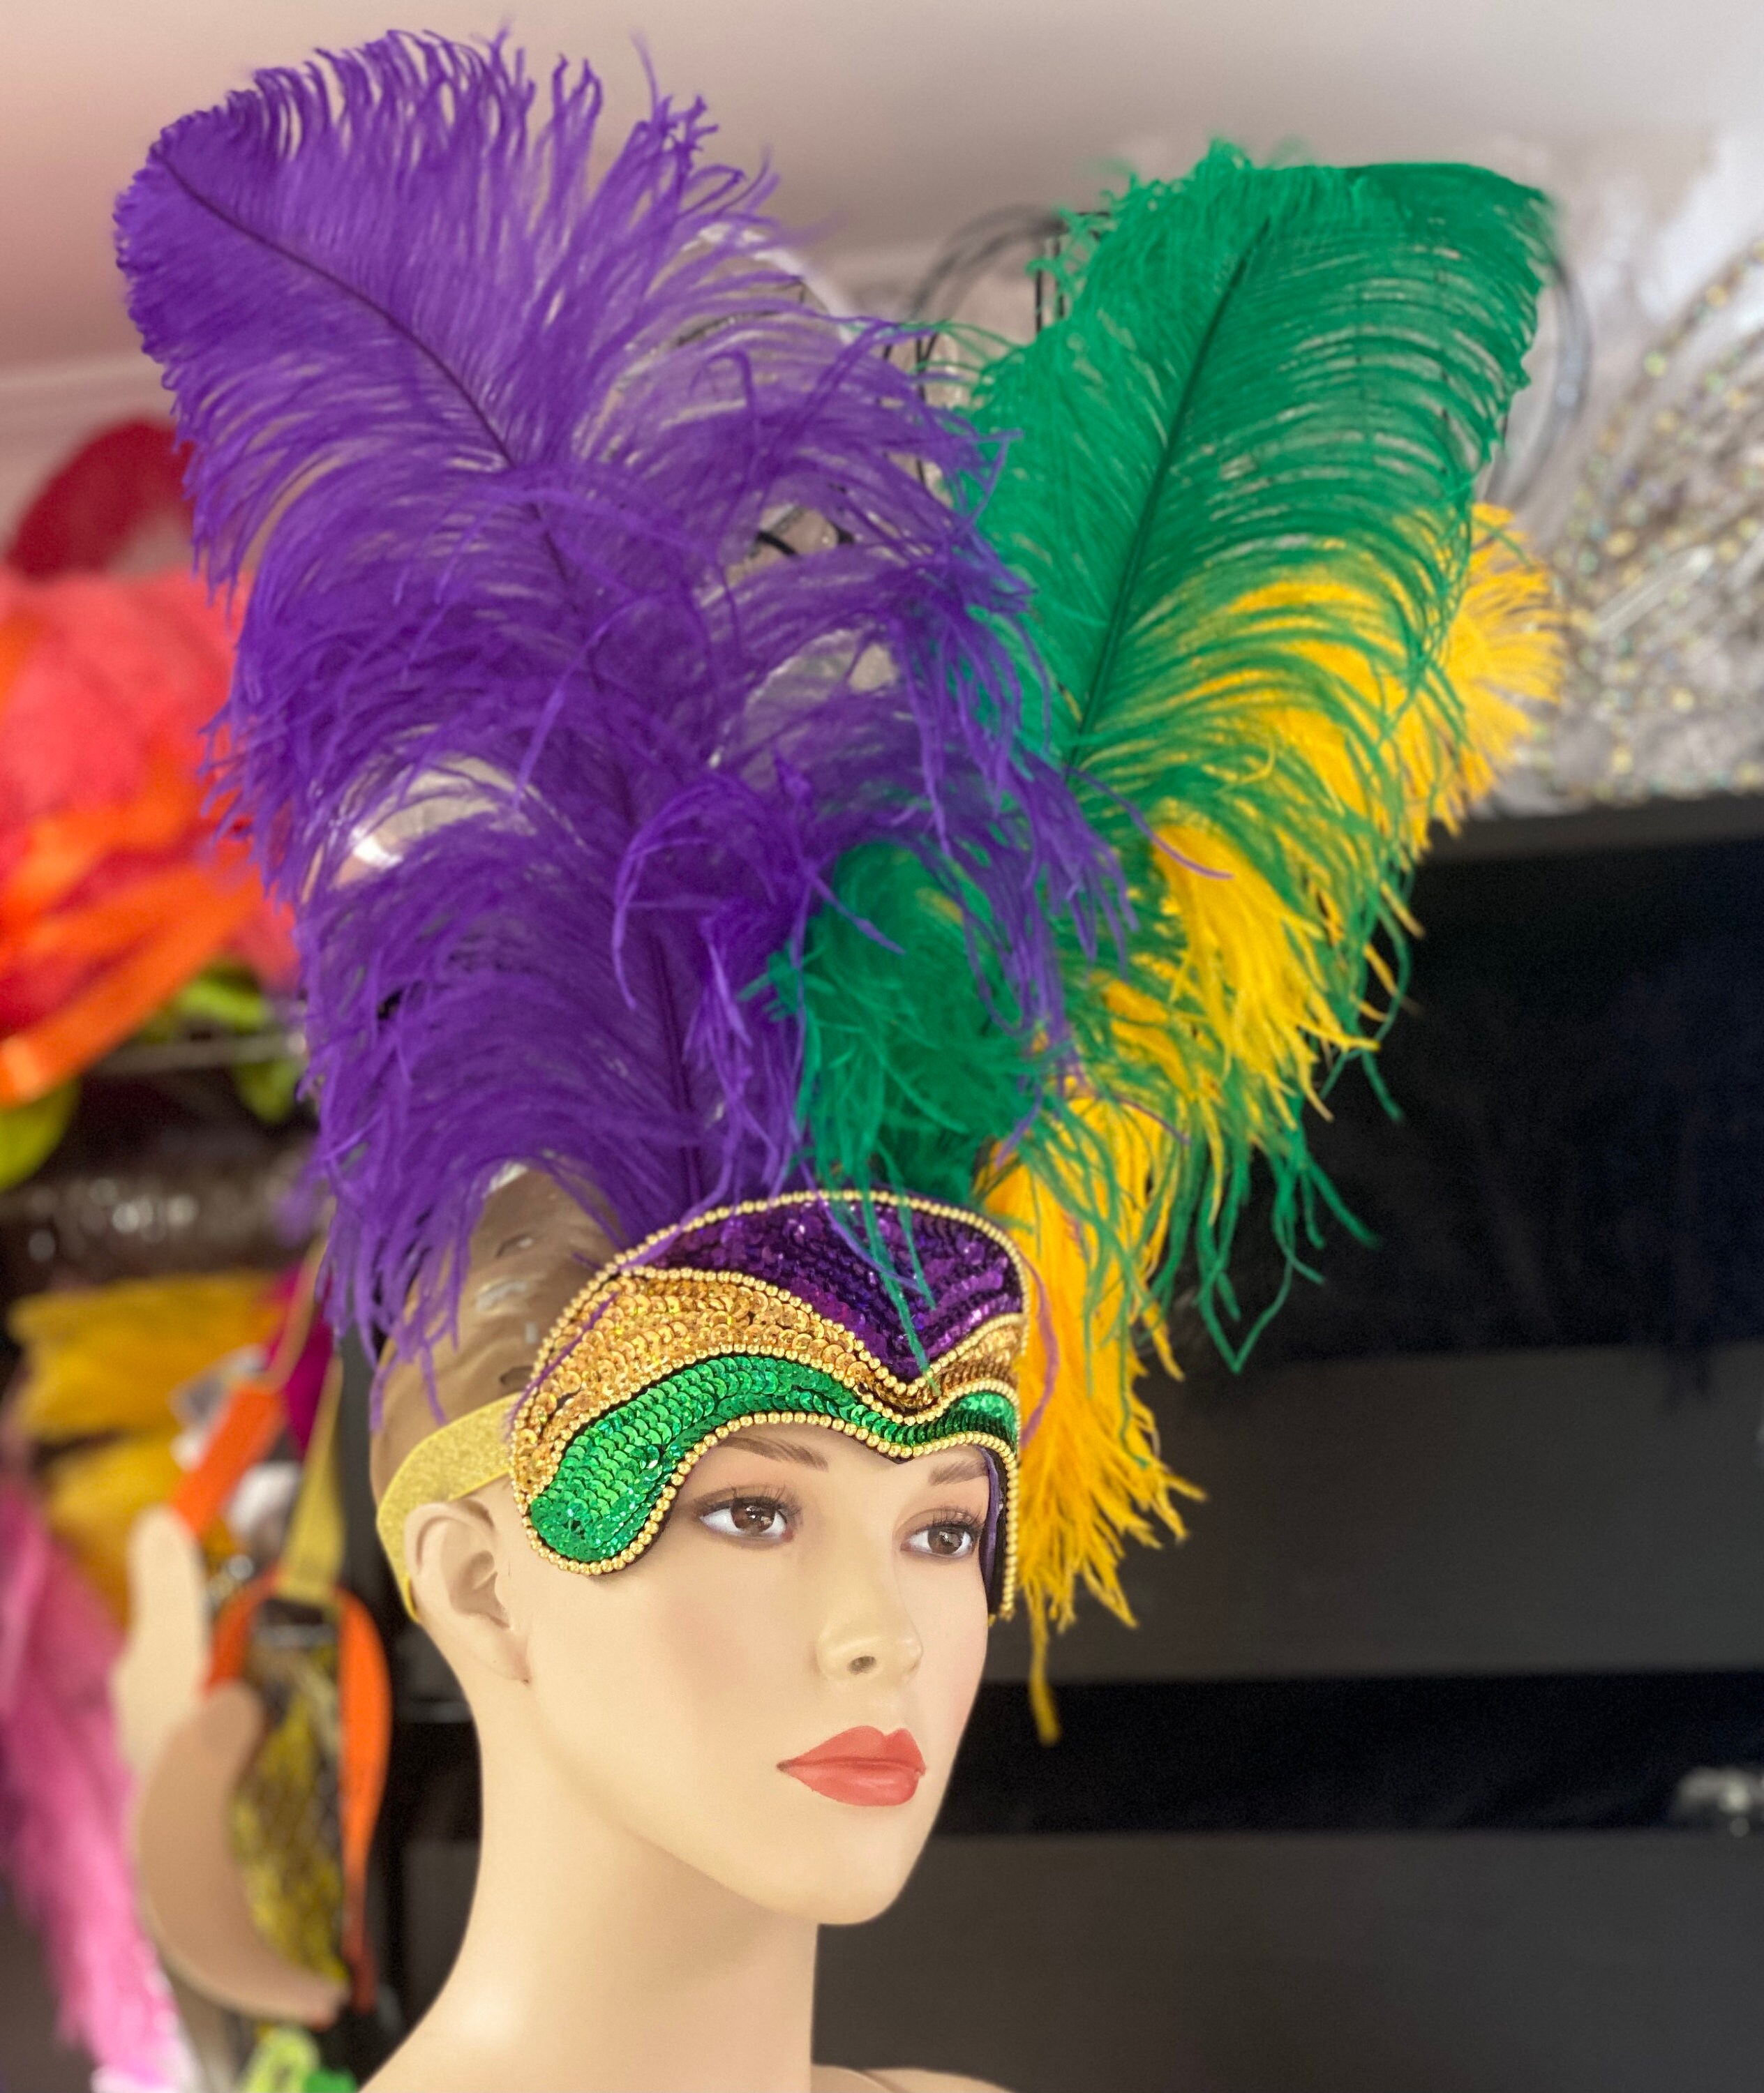 cnhairaccessories Mardi Gras Feather Headbands Feather with Letters